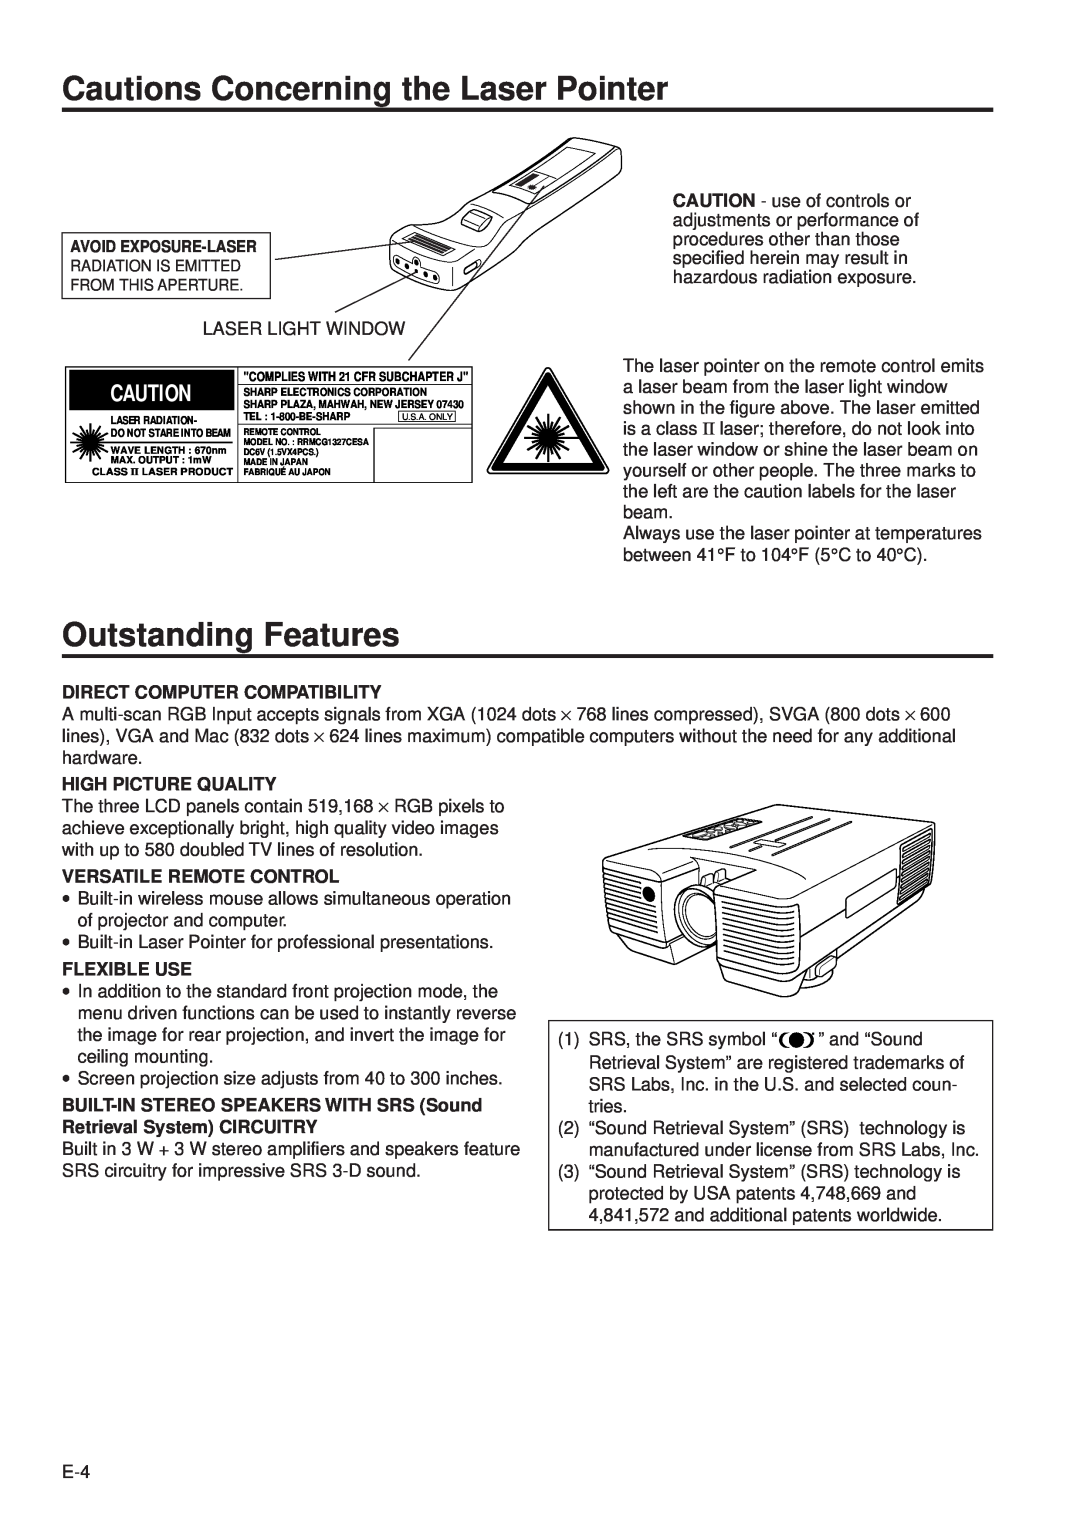 Sharp PG-D100U Cautions Concerning the Laser Pointer, Outstanding Features, Direct Computer Compatibility, Flexible Use 